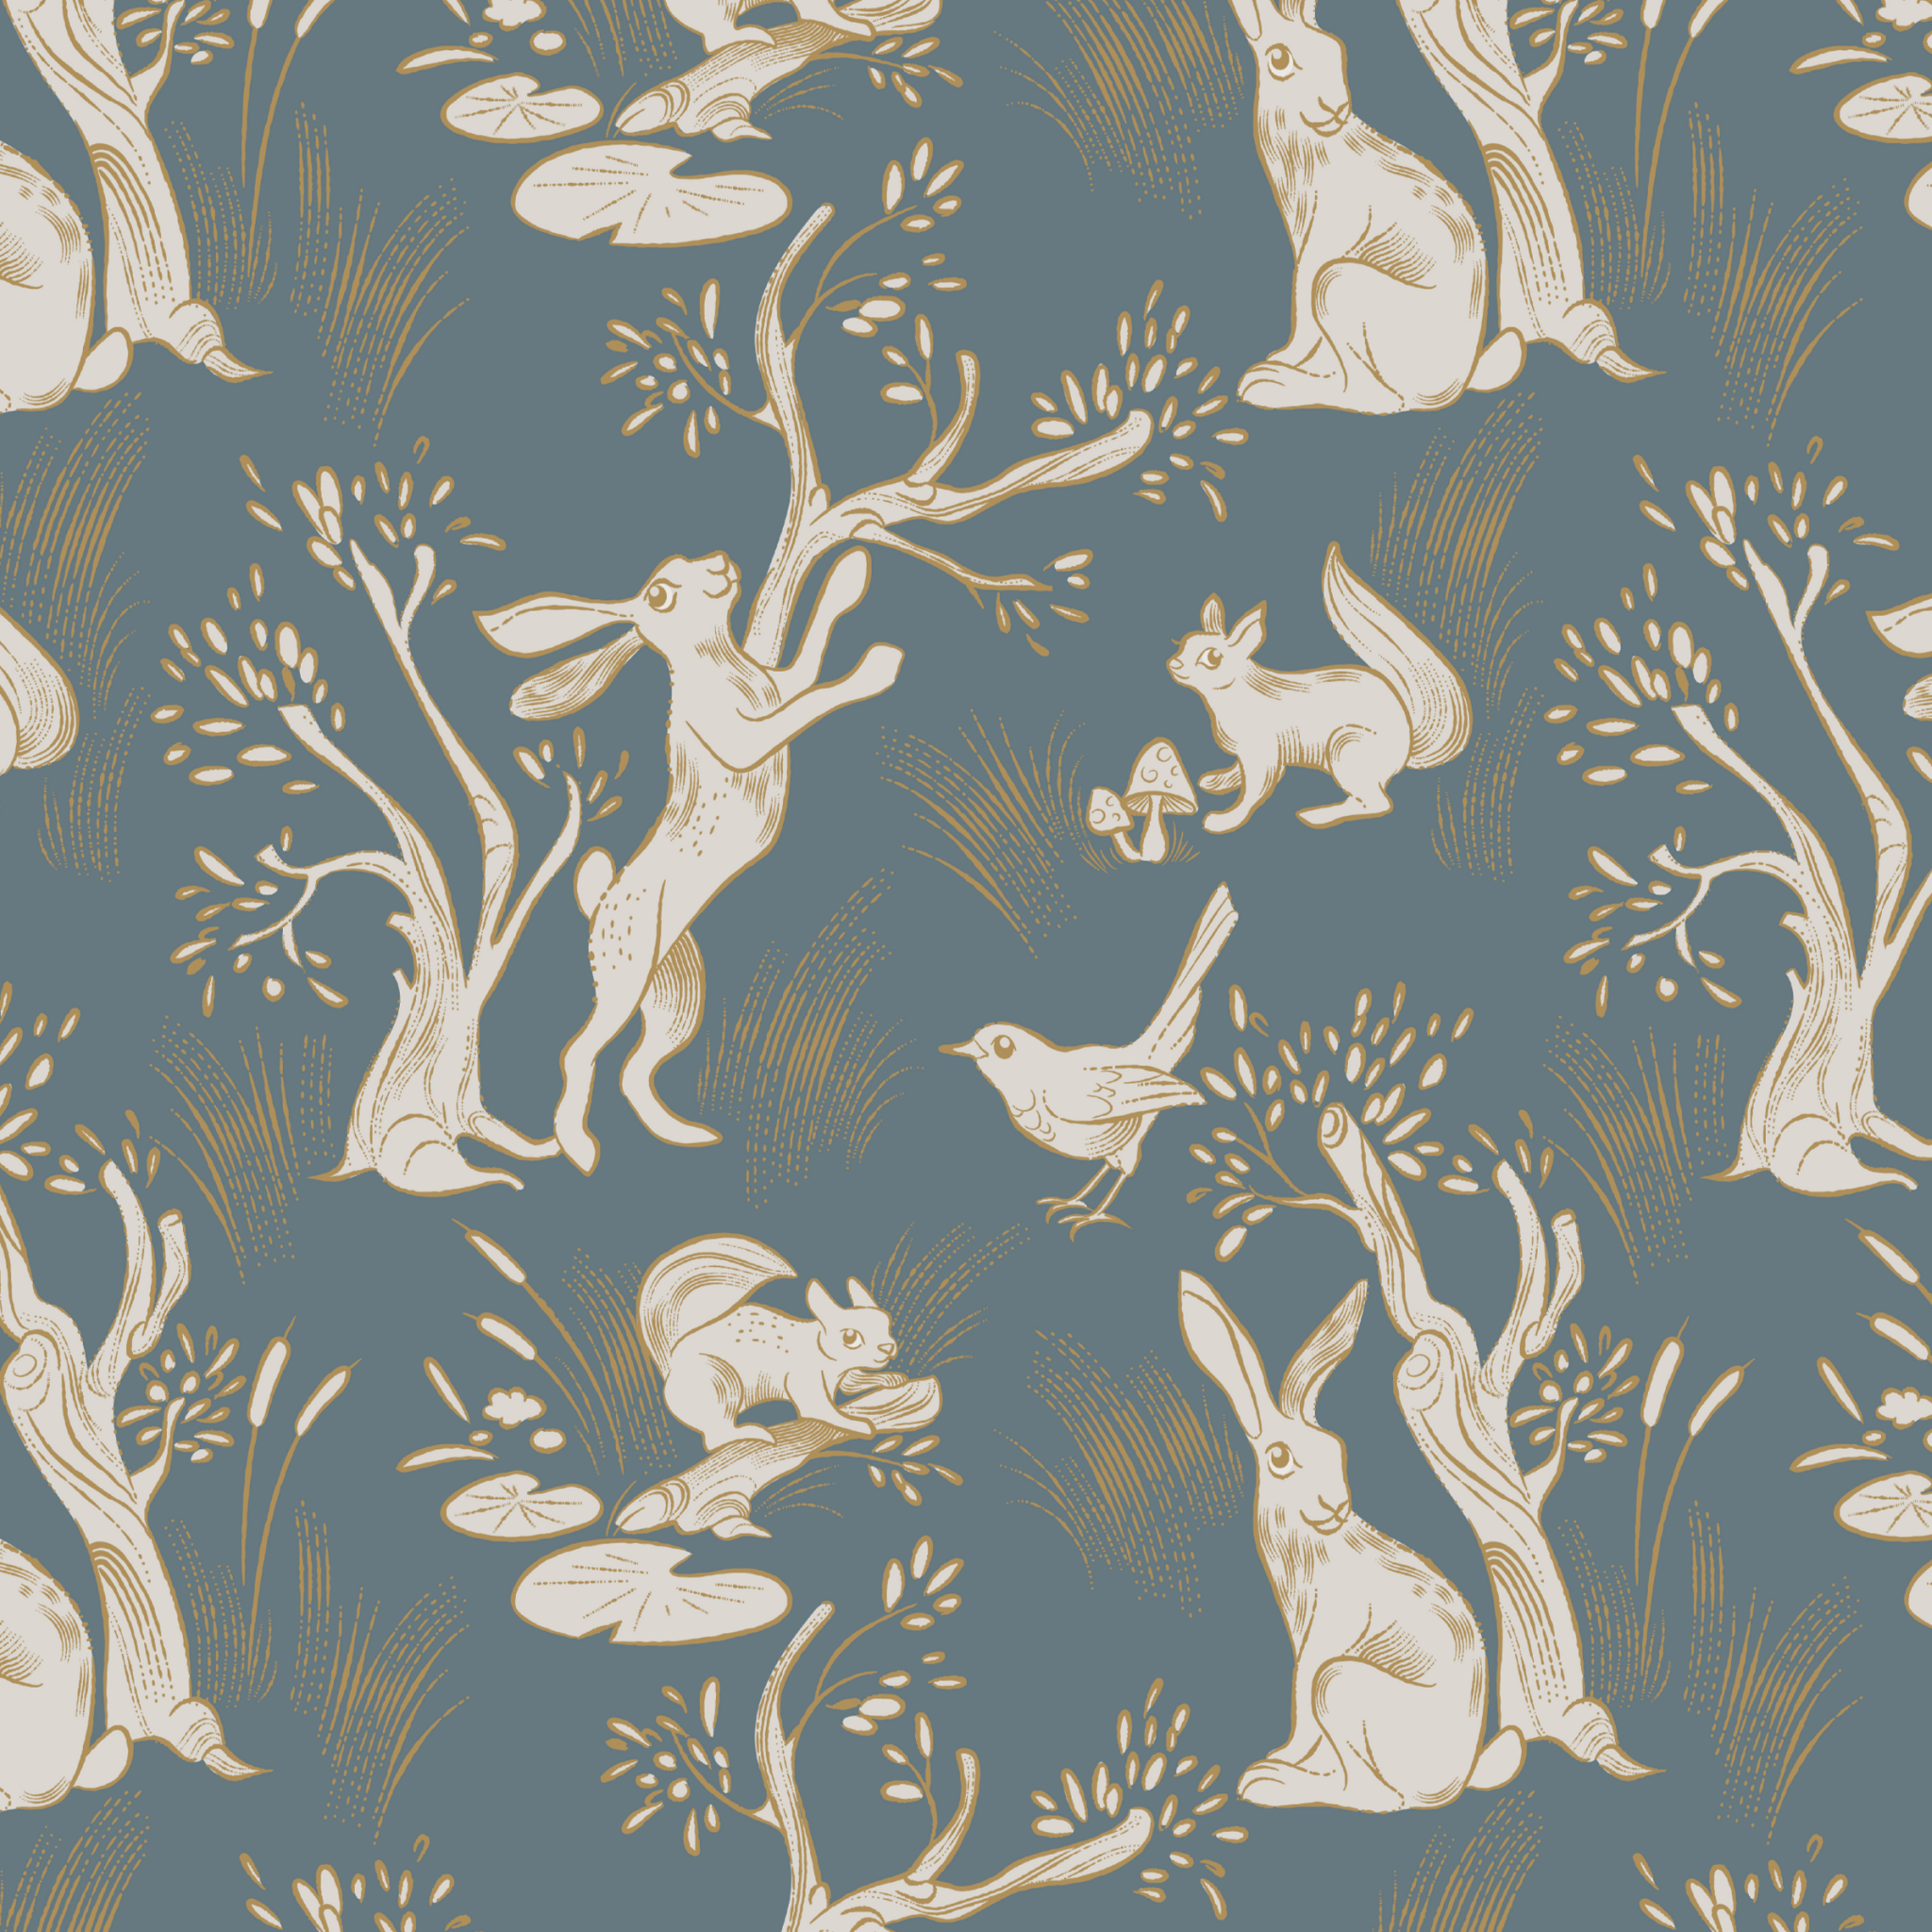 A close-up view of the wallpaper used in the previous images, displaying an intricate pattern of white rabbits, squirrels, birds, and trees with leaves, all on a navy blue background.